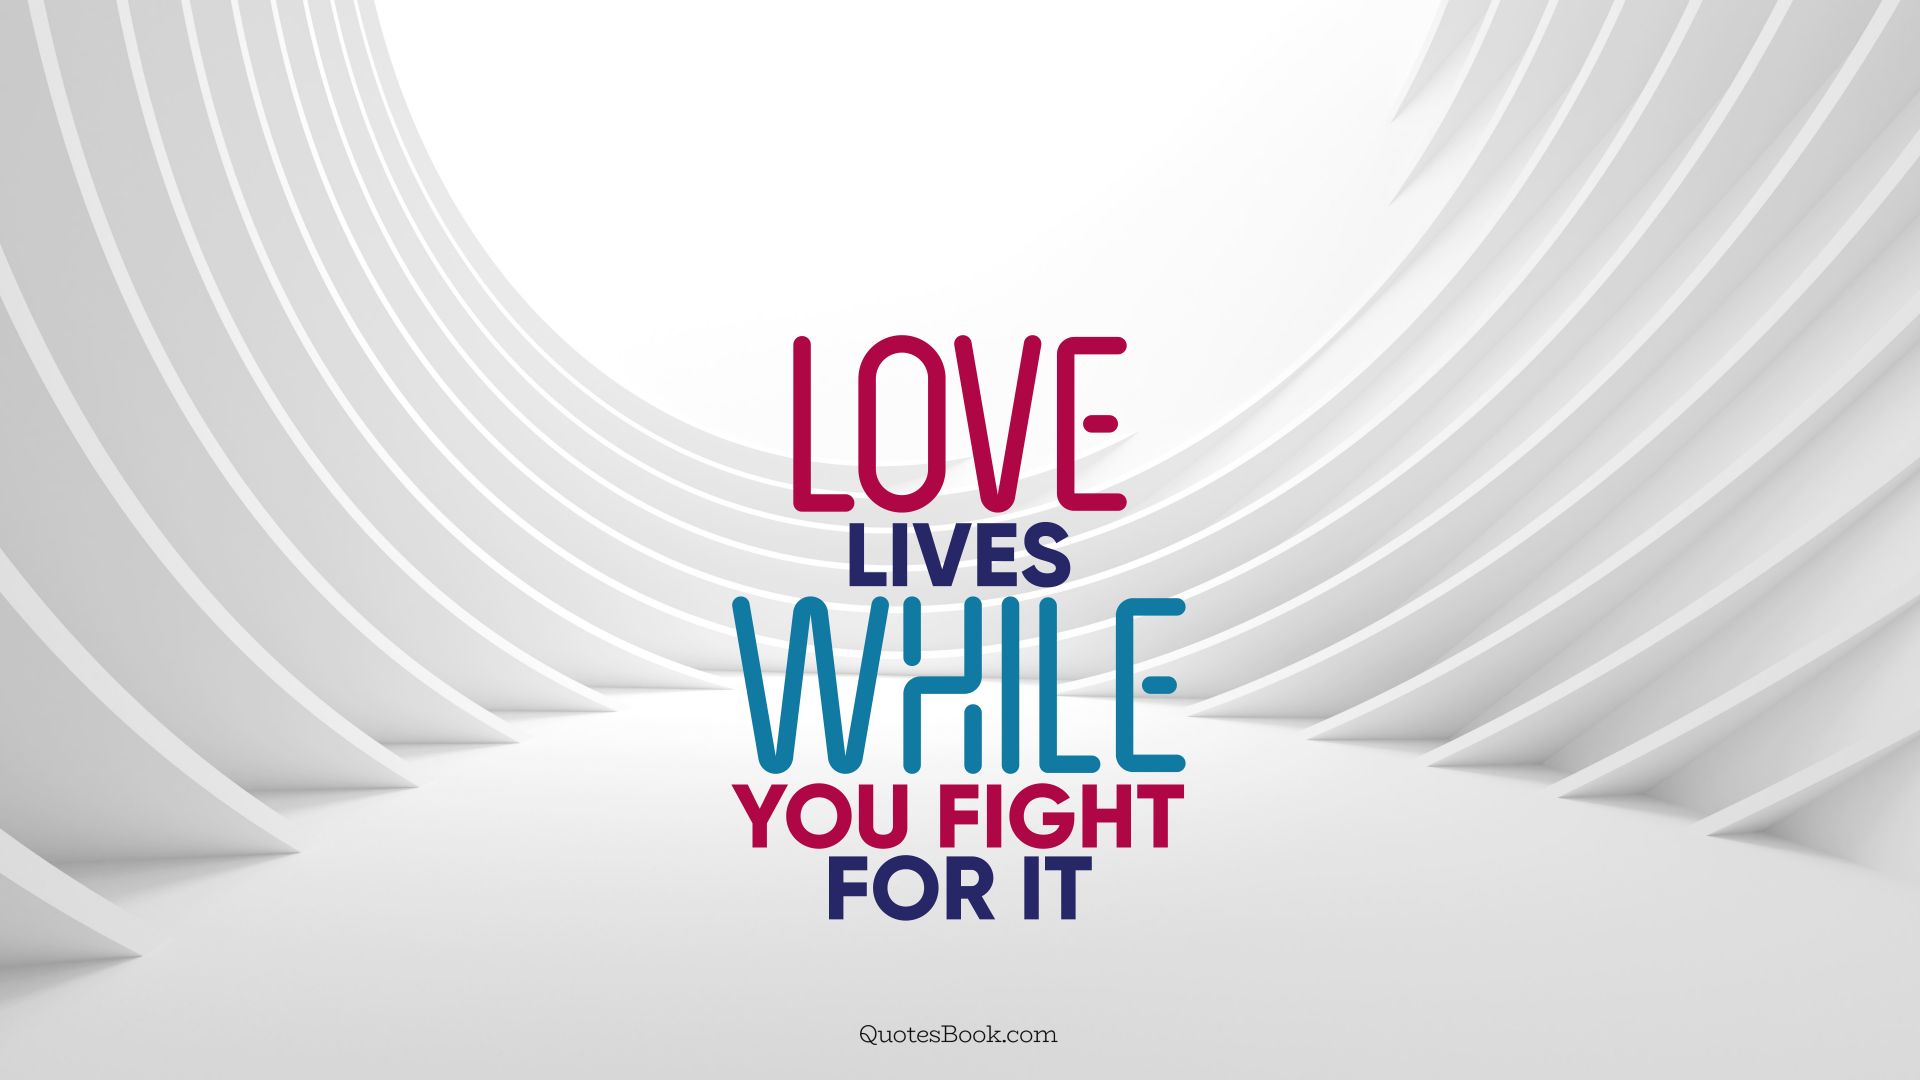 Love lives while you fight for it. - Quote by QuotesBook